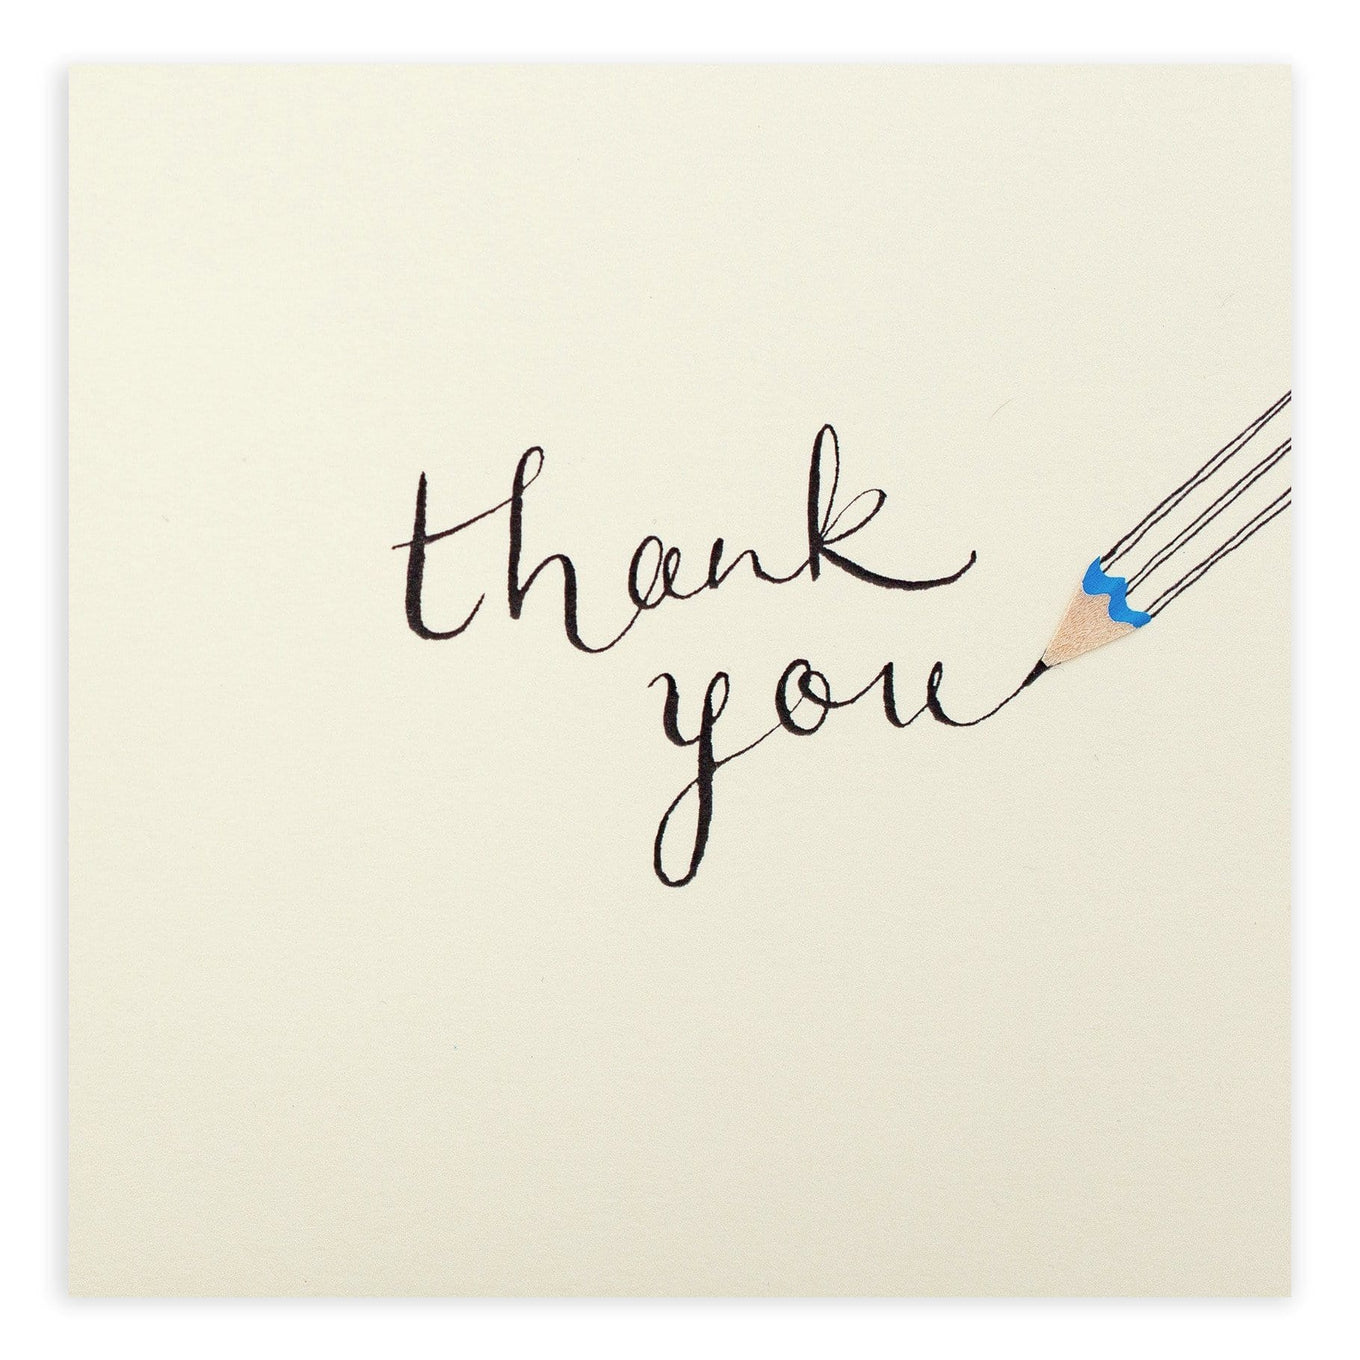 The card reads "thank you" written by an illustrated pencil with the tip of the pencil made of a blue pencil shaving.